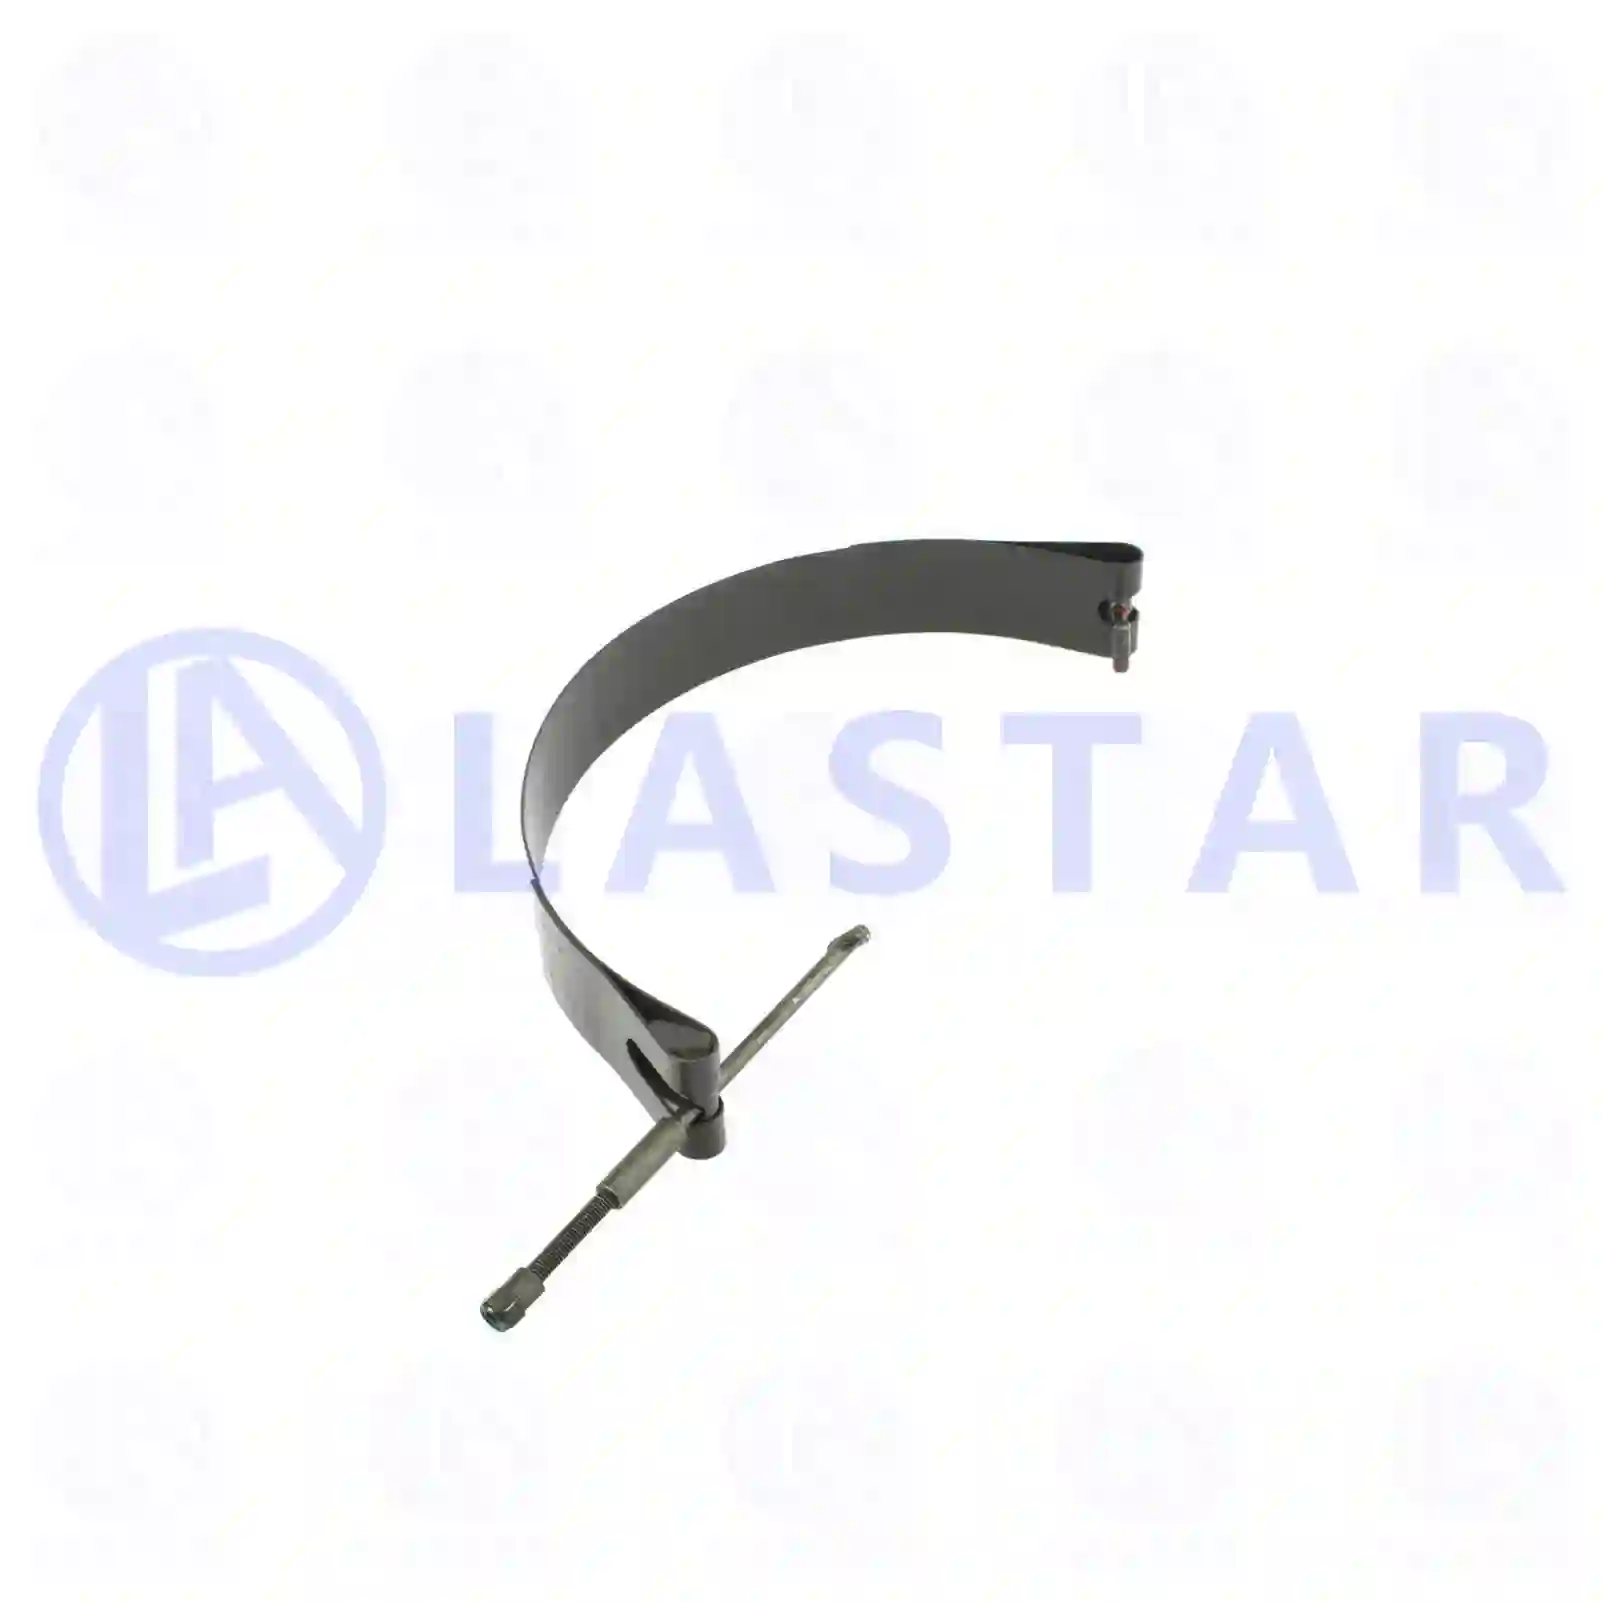 Tensioning band, 77717636, 1391956, 1724862, ZG50813-0008 ||  77717636 Lastar Spare Part | Truck Spare Parts, Auotomotive Spare Parts Tensioning band, 77717636, 1391956, 1724862, ZG50813-0008 ||  77717636 Lastar Spare Part | Truck Spare Parts, Auotomotive Spare Parts